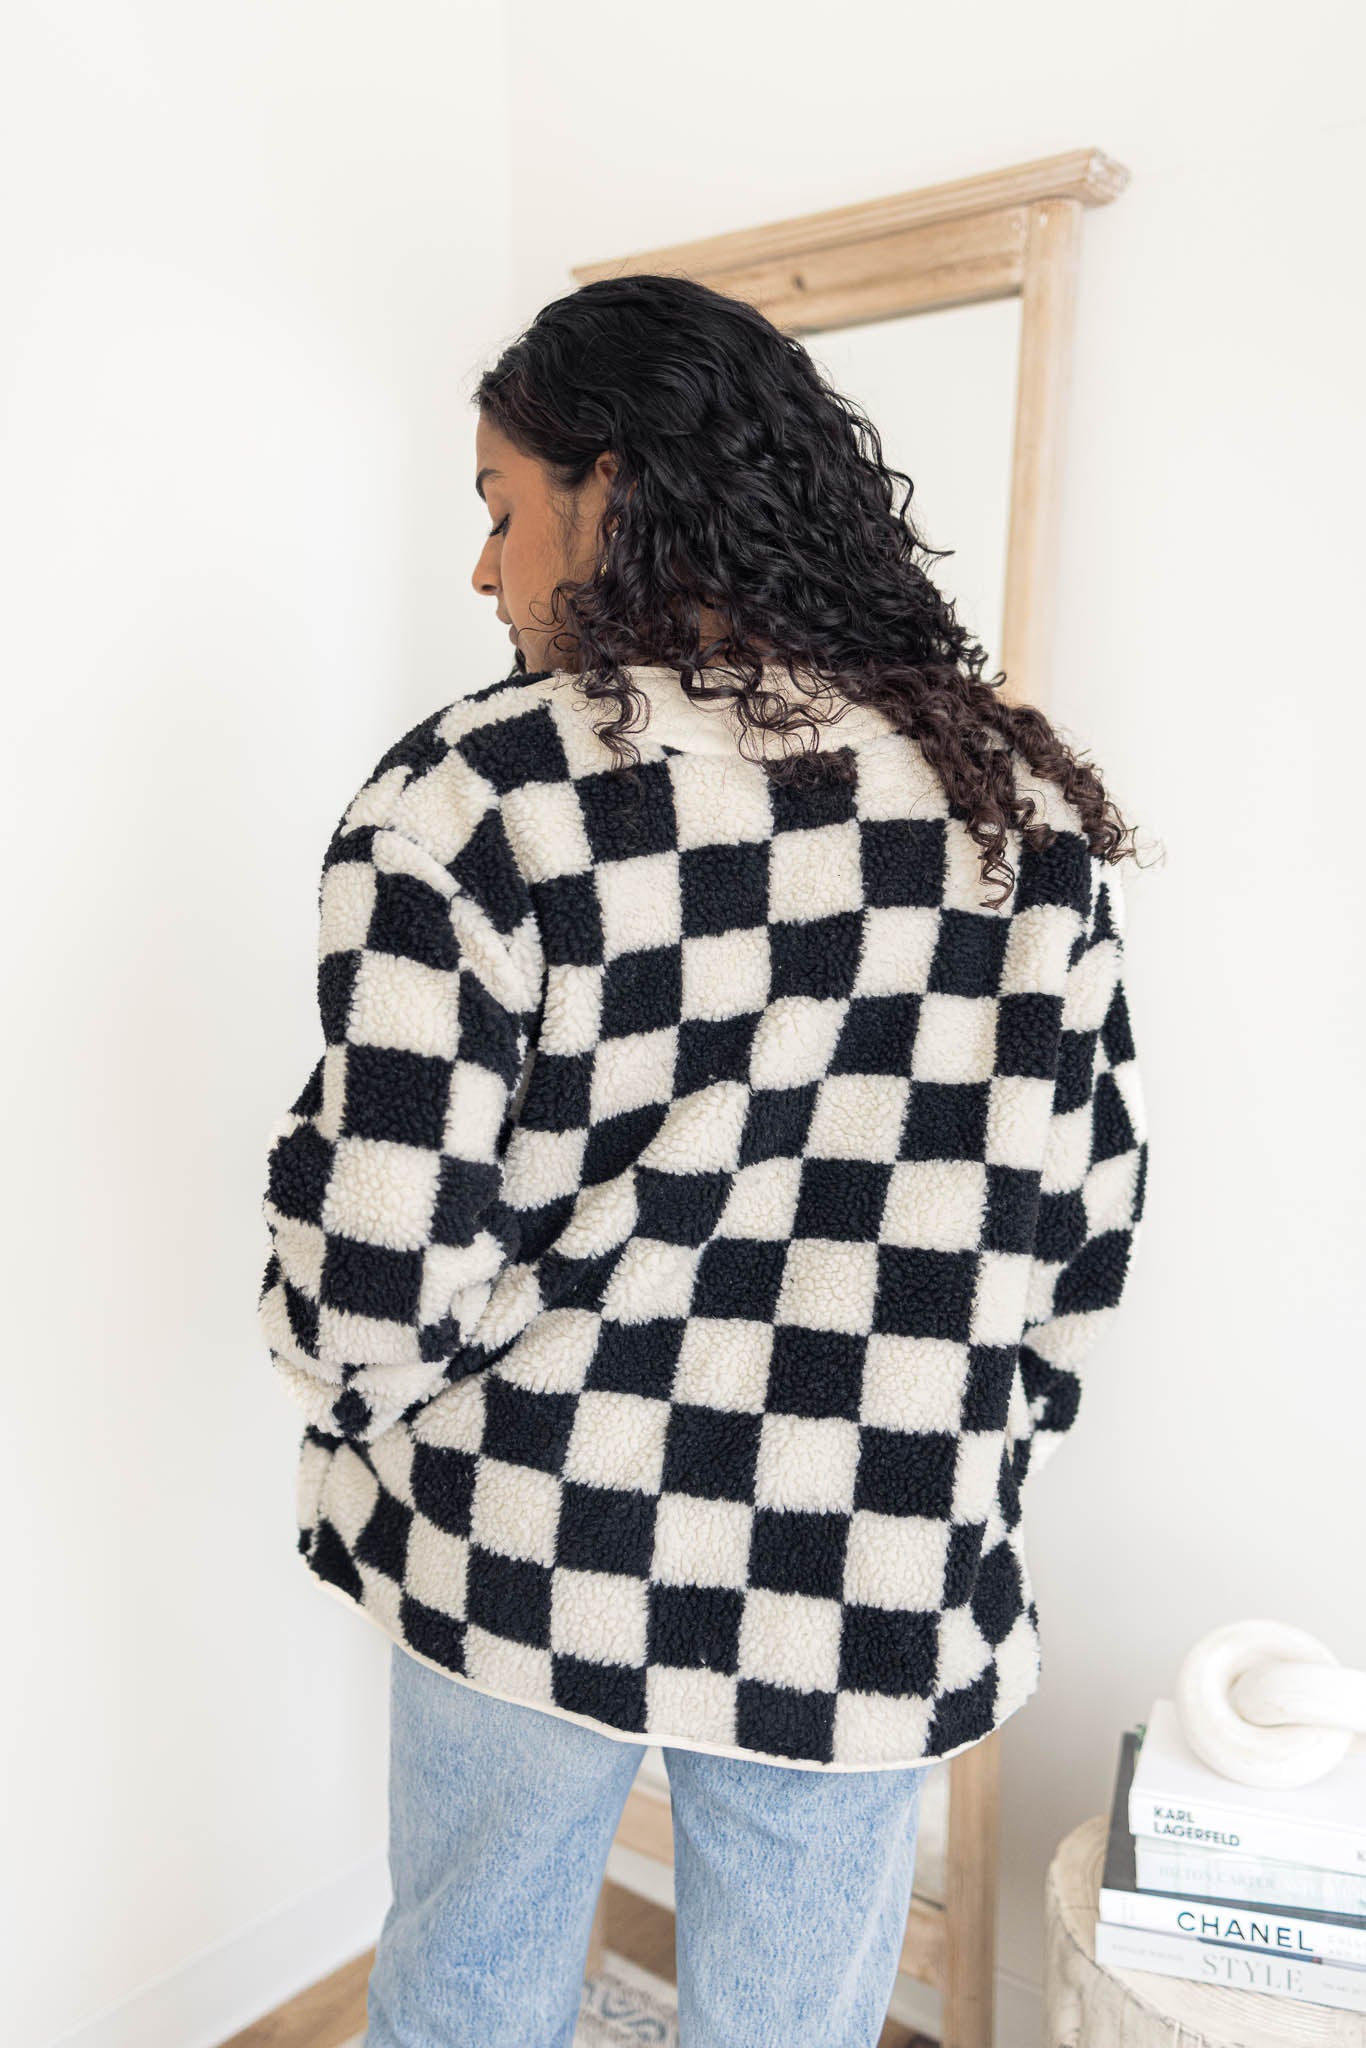 Game of Chess Jacket